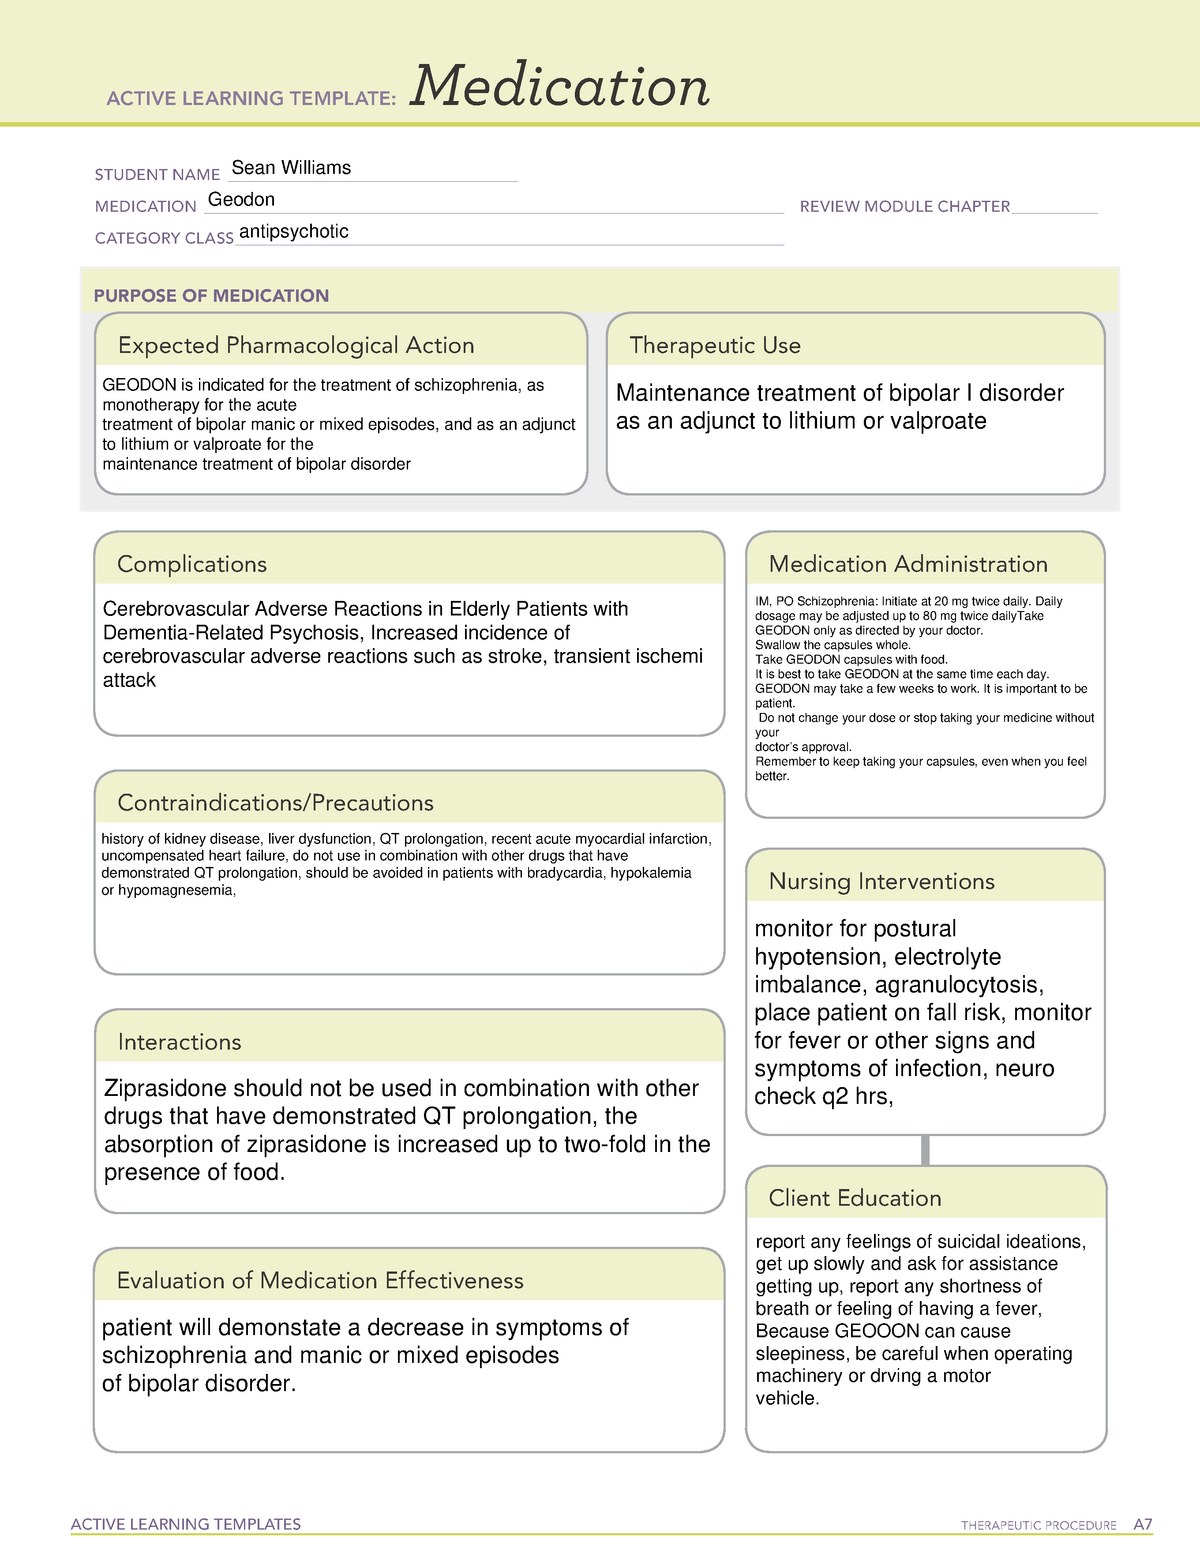 ATI Medication Template Geodon ACTIVE LEARNING TEMPLATES THERAPEUTIC